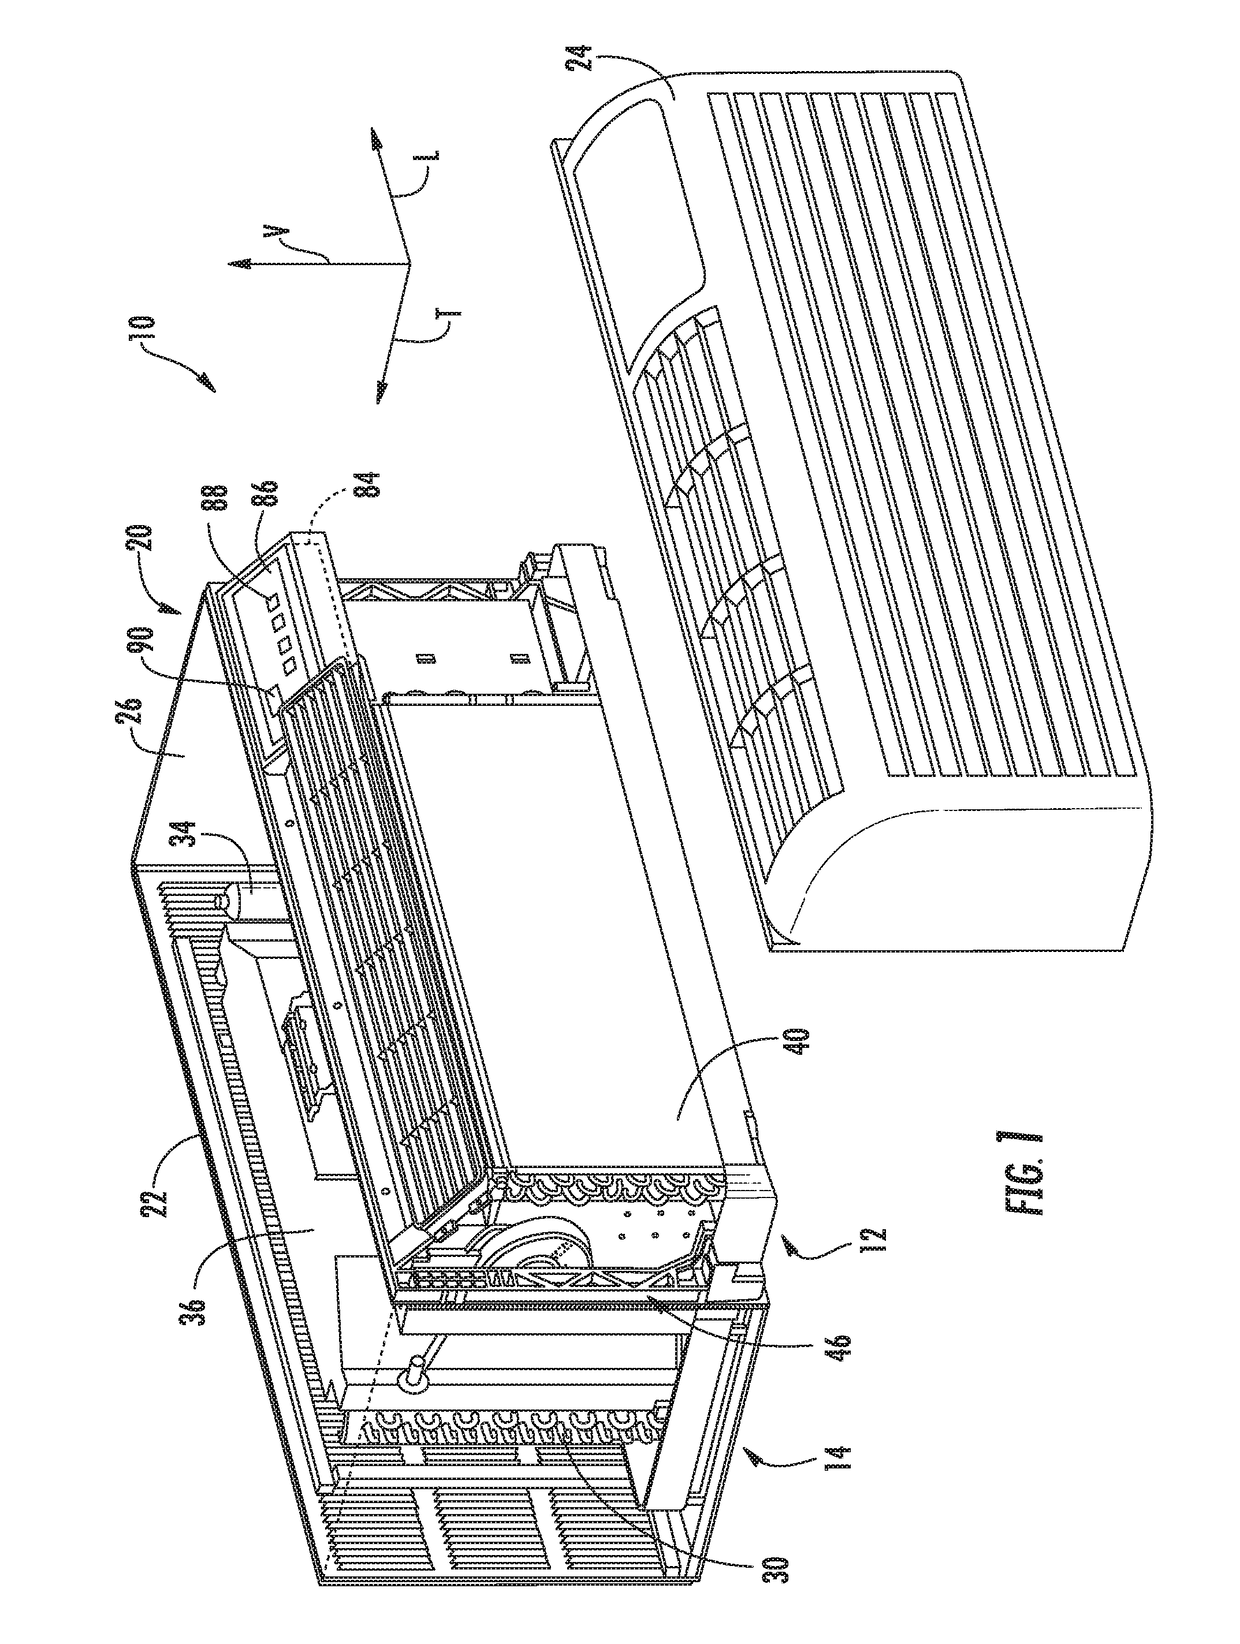 Packaged Terminal Air Conditioner Unit With Vent Door Position Detection